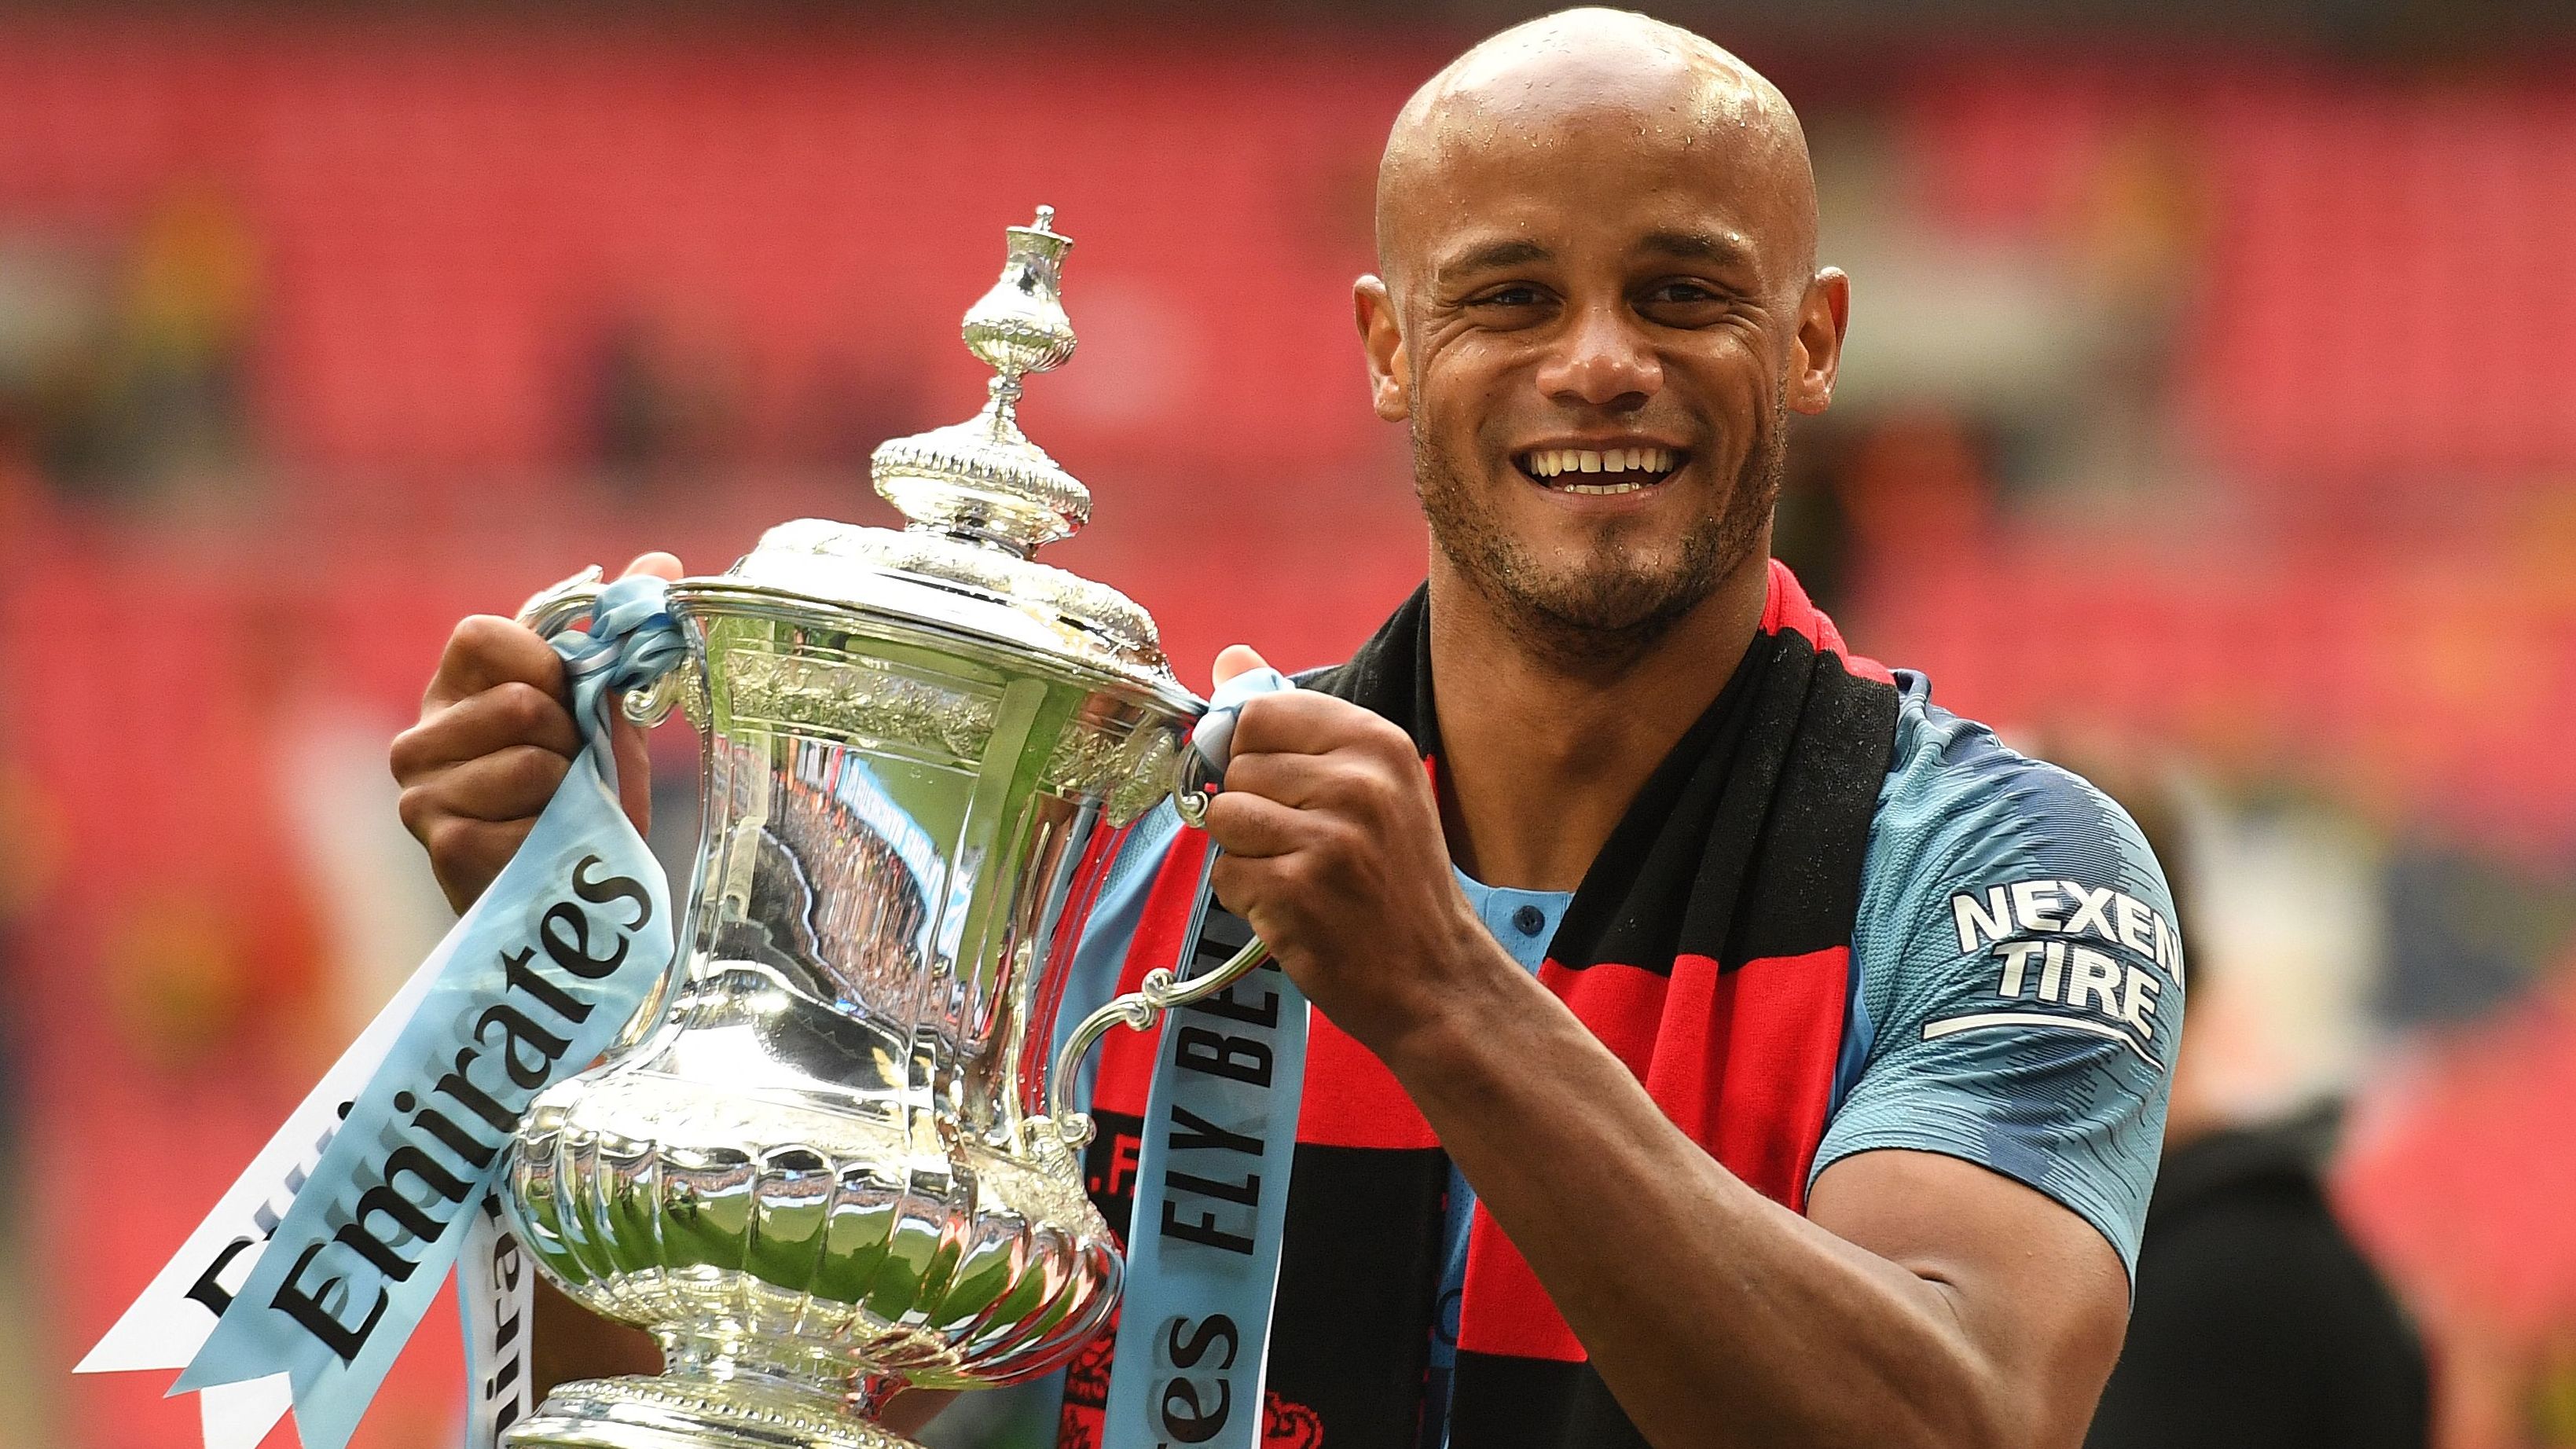 Vincent Kompany will leave Manchester City after 11 years at the club.